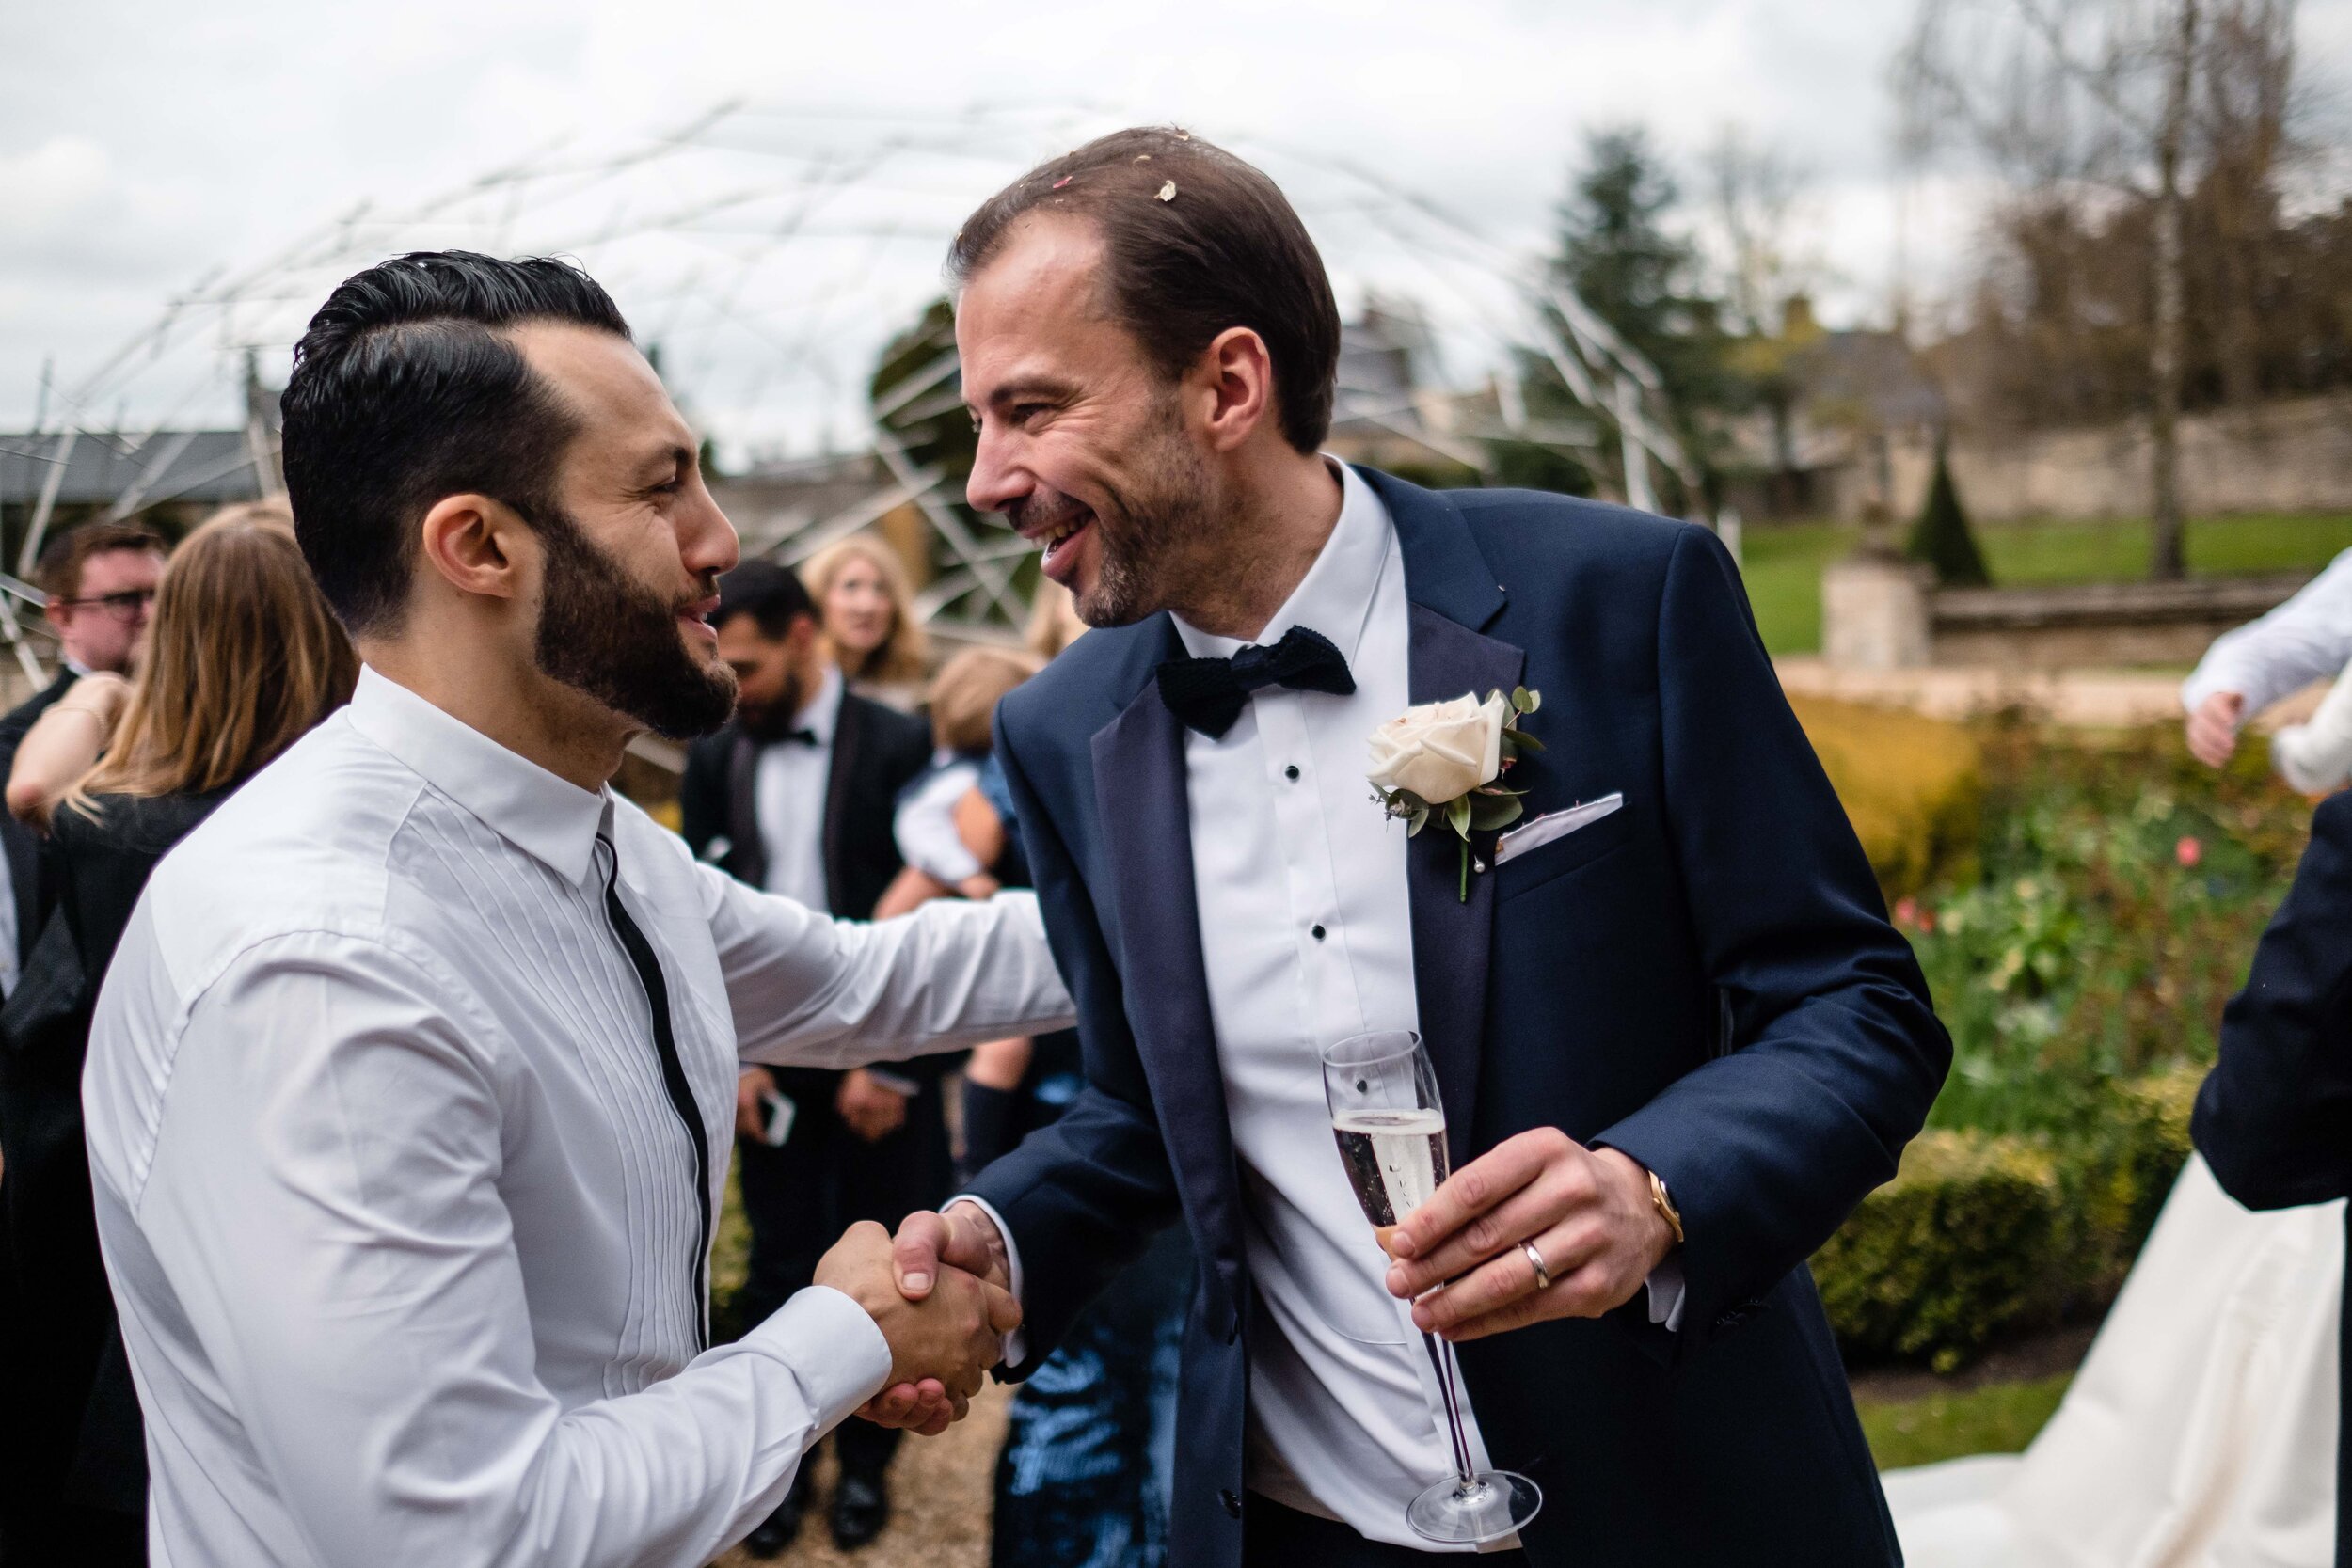 groom greeting friend with a handshake in a garden